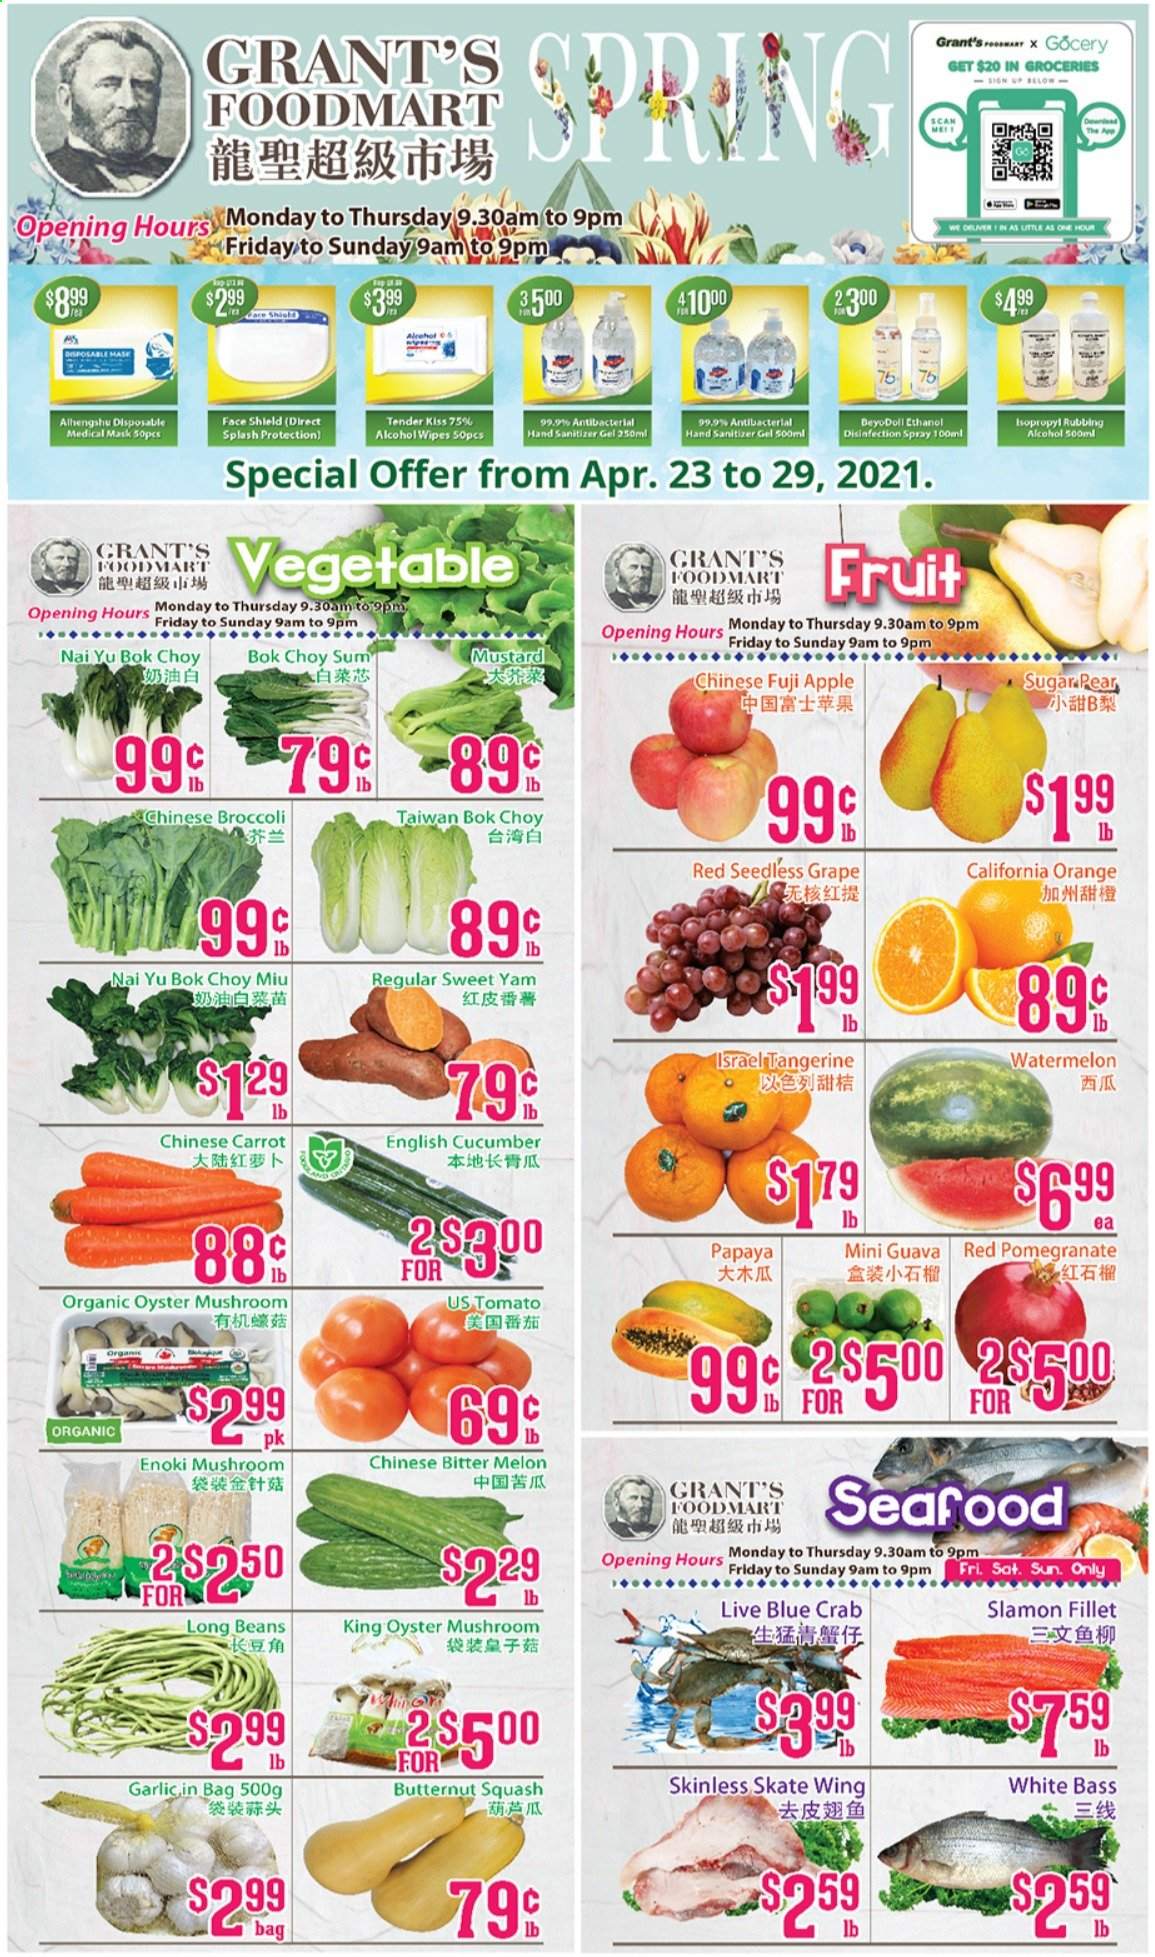 thumbnail - Grant's Foodmart Flyer - April 23, 2021 - April 29, 2021 - Sales products - oyster mushrooms, mushrooms, beans, bok choy, broccoli, butternut squash, garlic, guava, watermelon, pears, Fuji apple, melons, pomegranate, oysters, crab, sugar, mustard, Grant's, hand sanitizer, disposable mask, chinese broccoli. Page 1.